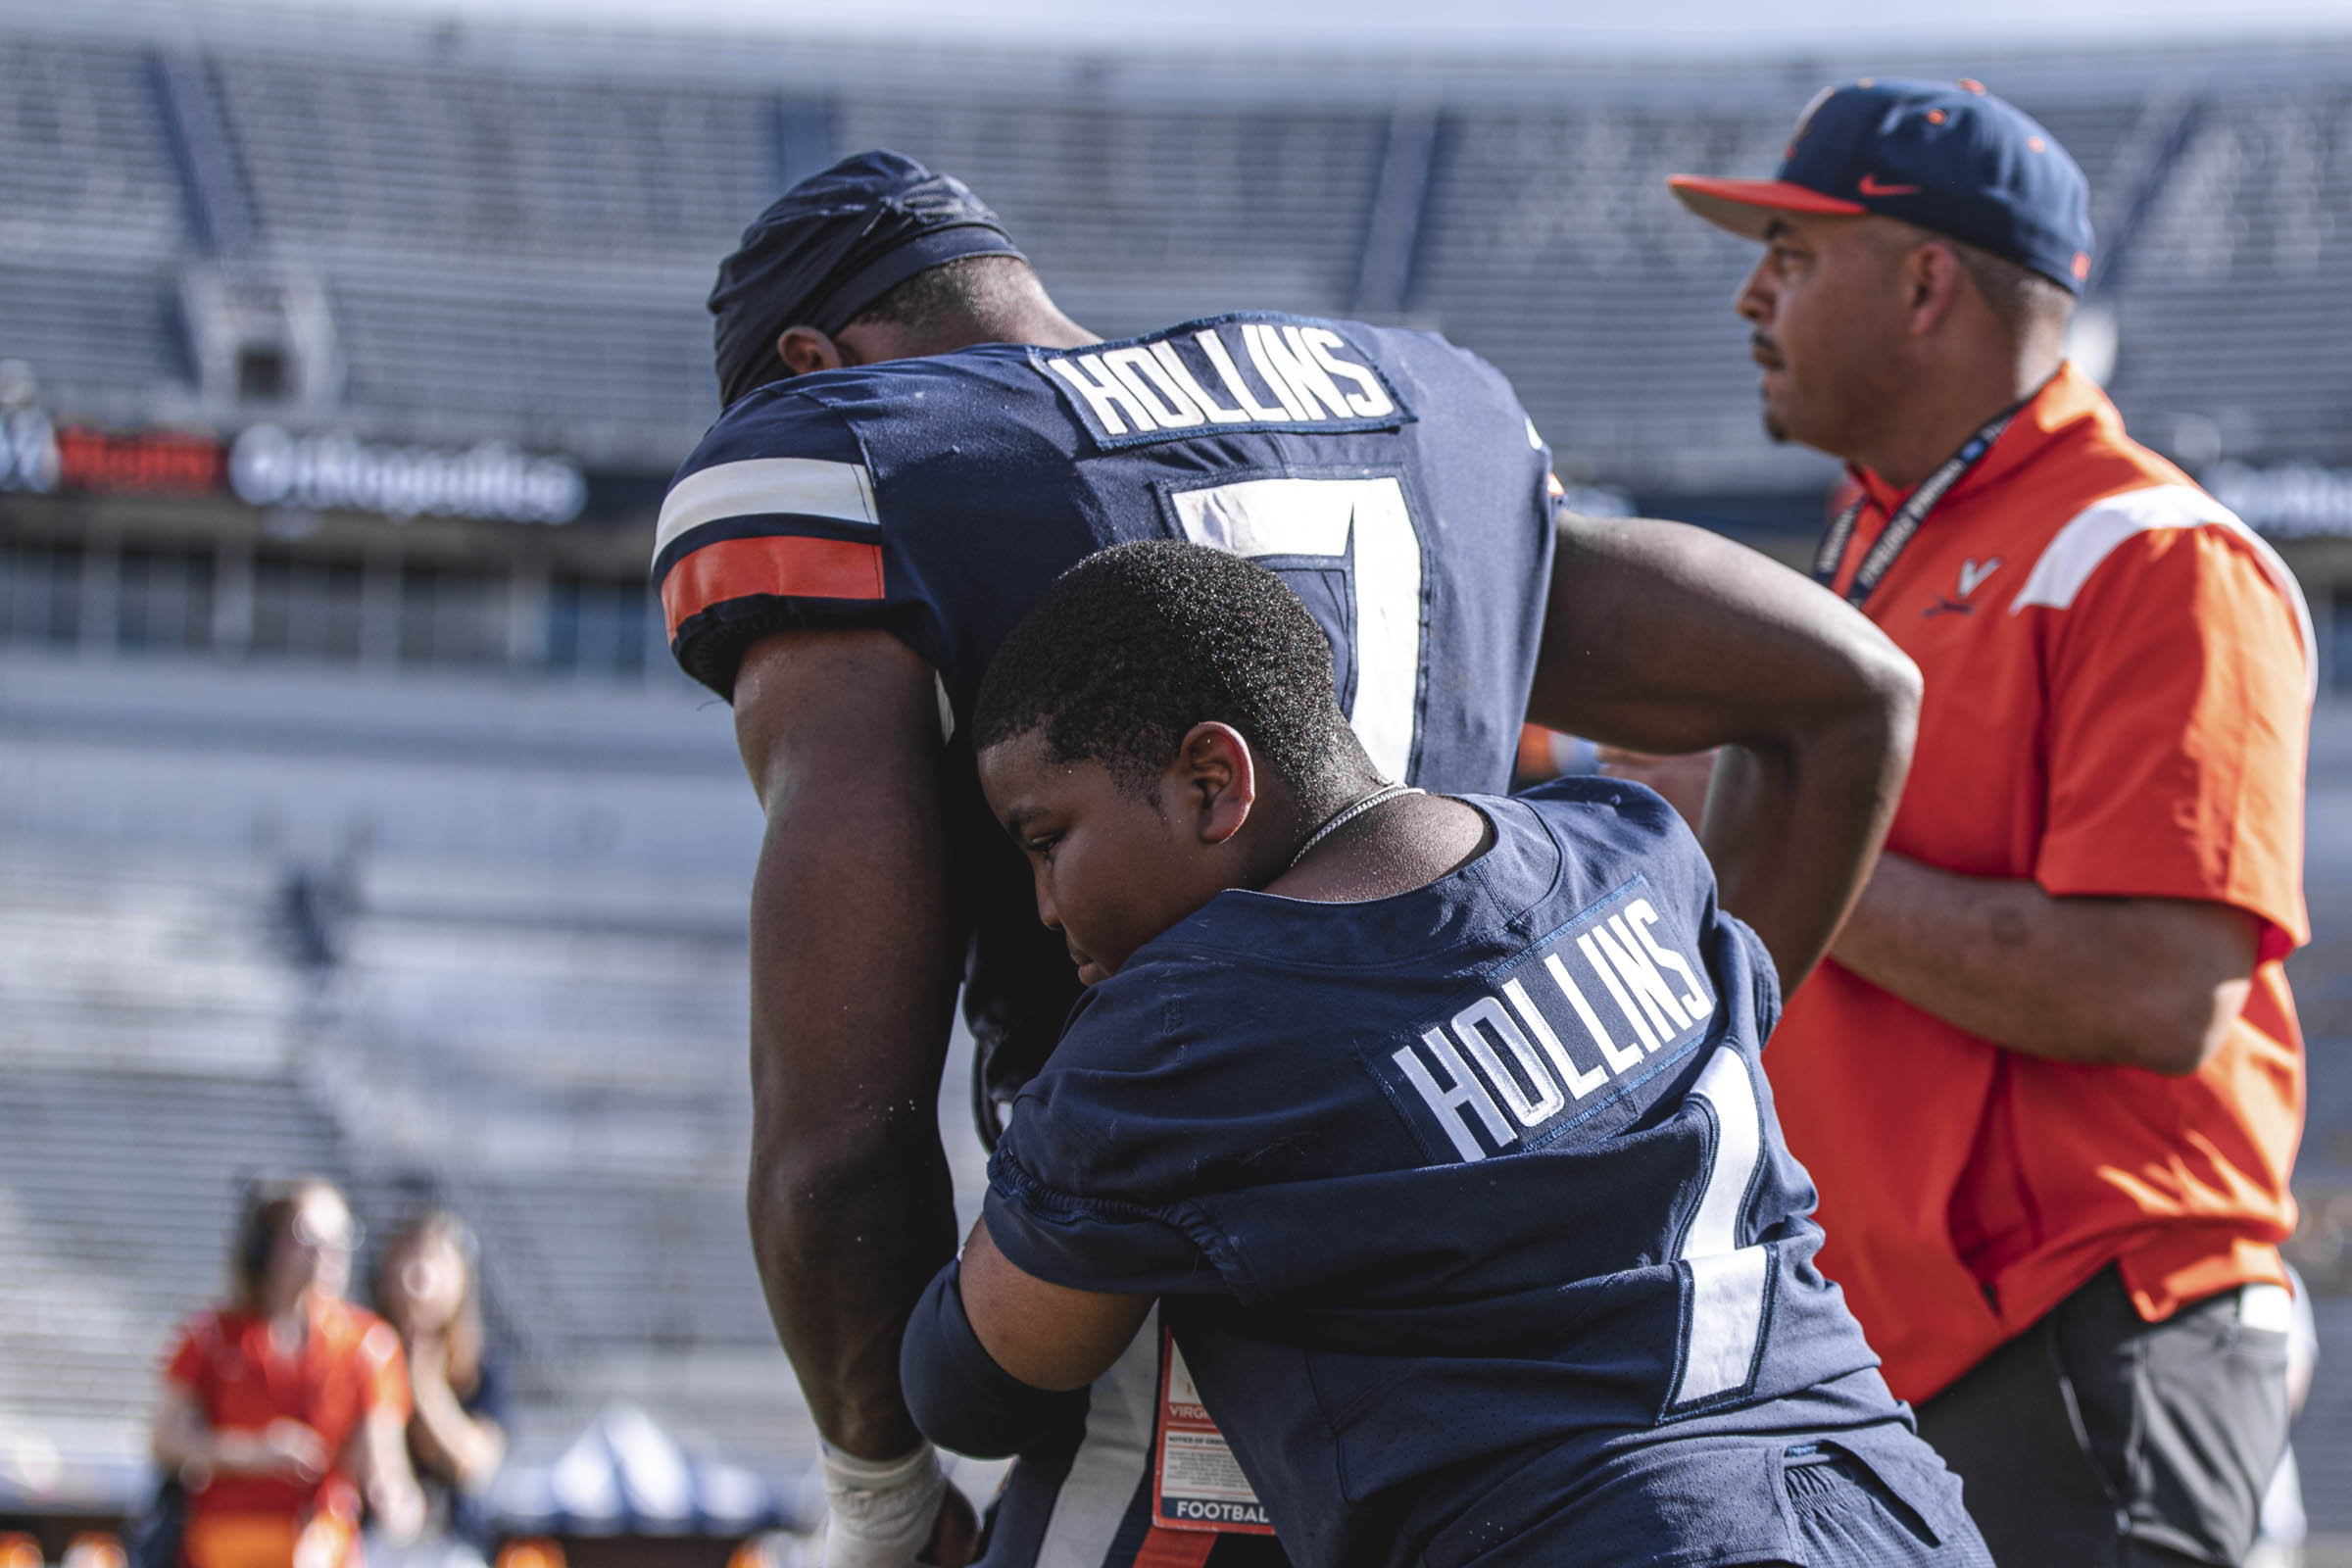 Candid of Mike Hollins on the football field being hugged by his little brother Deuce